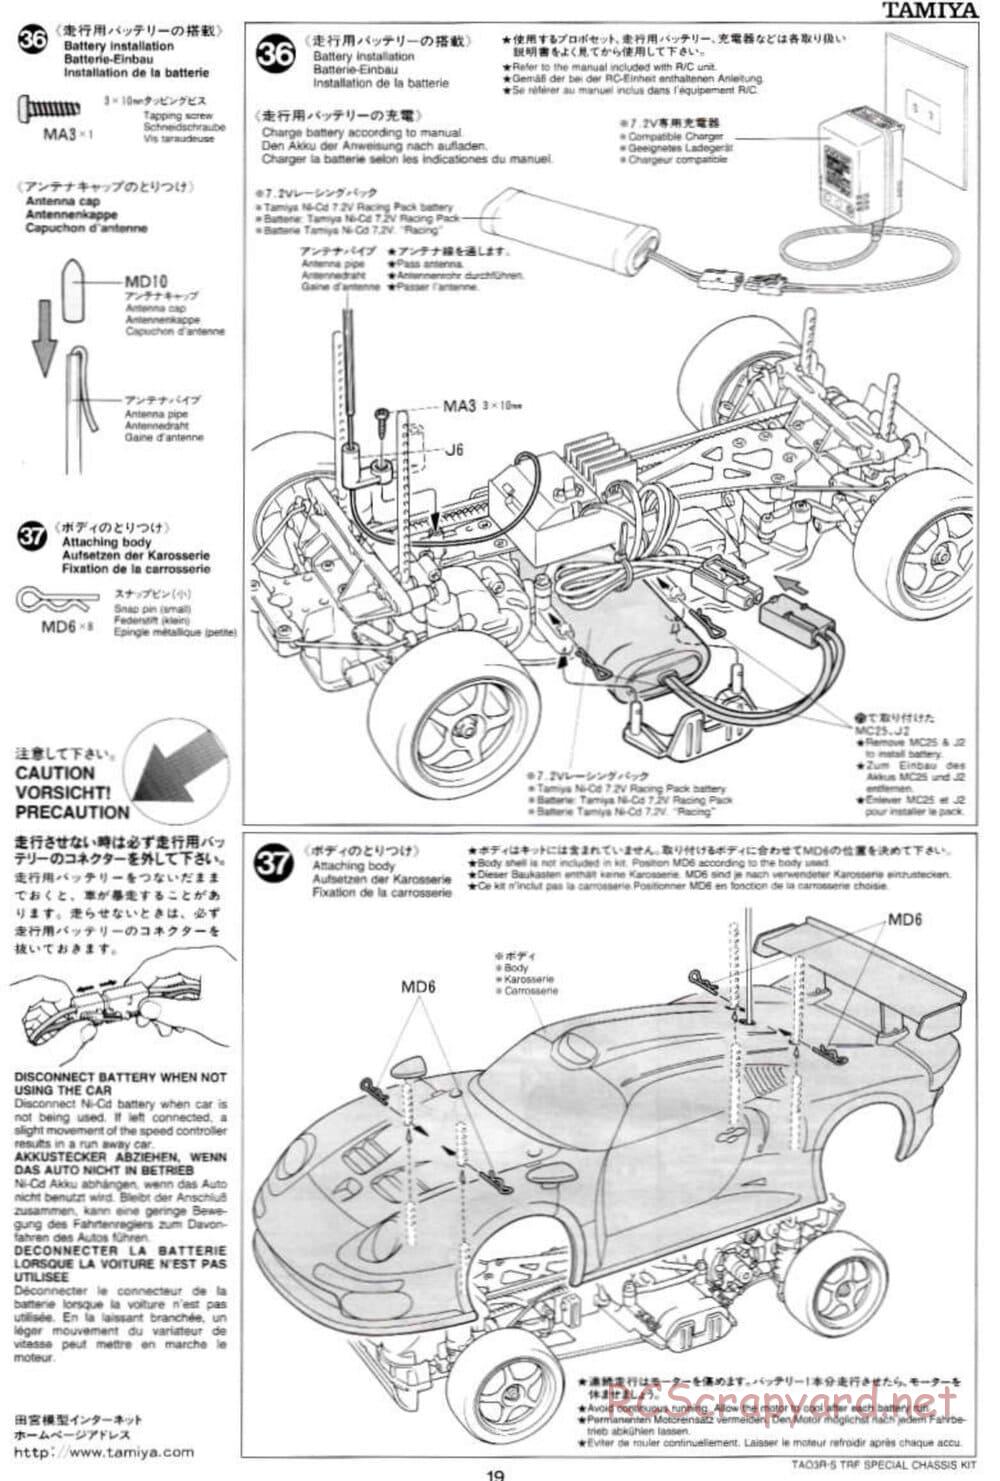 Tamiya - TA-03RS TRF Special Chassis - Manual - Page 19